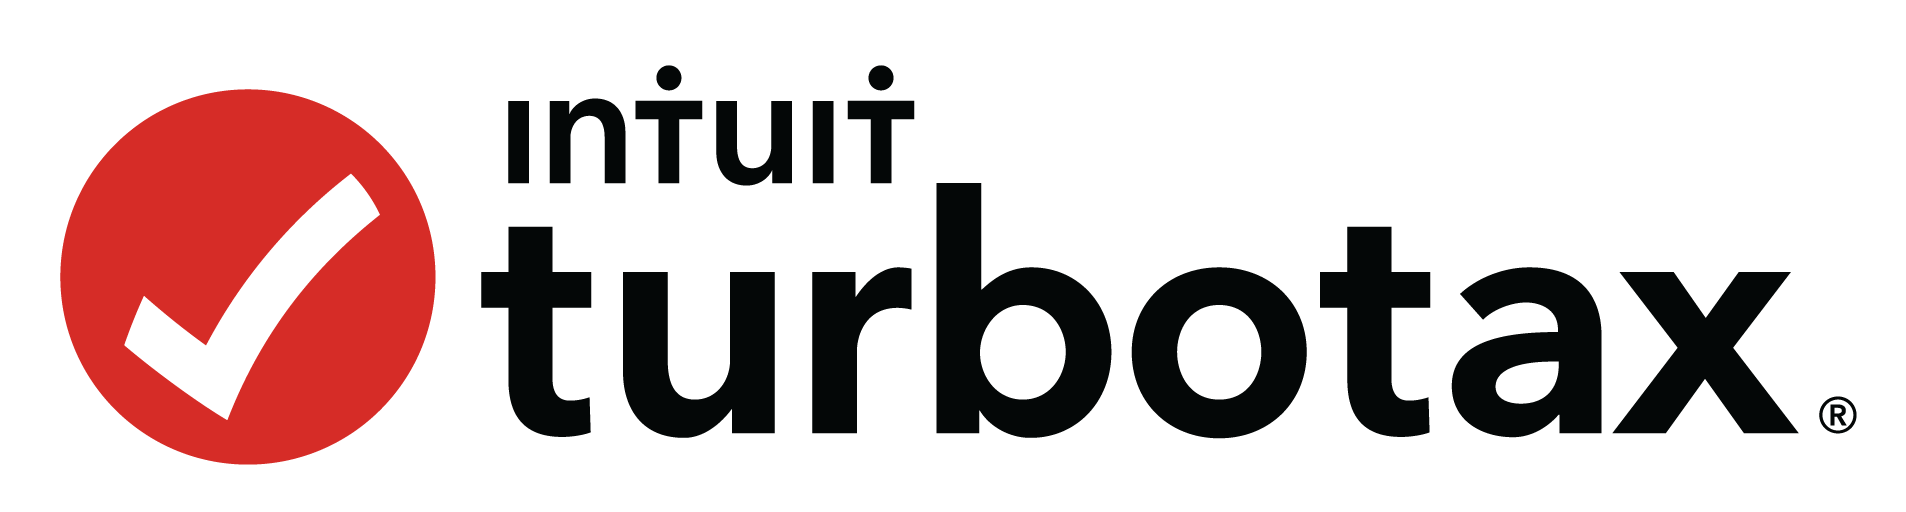 turbotax for s corporation 2015